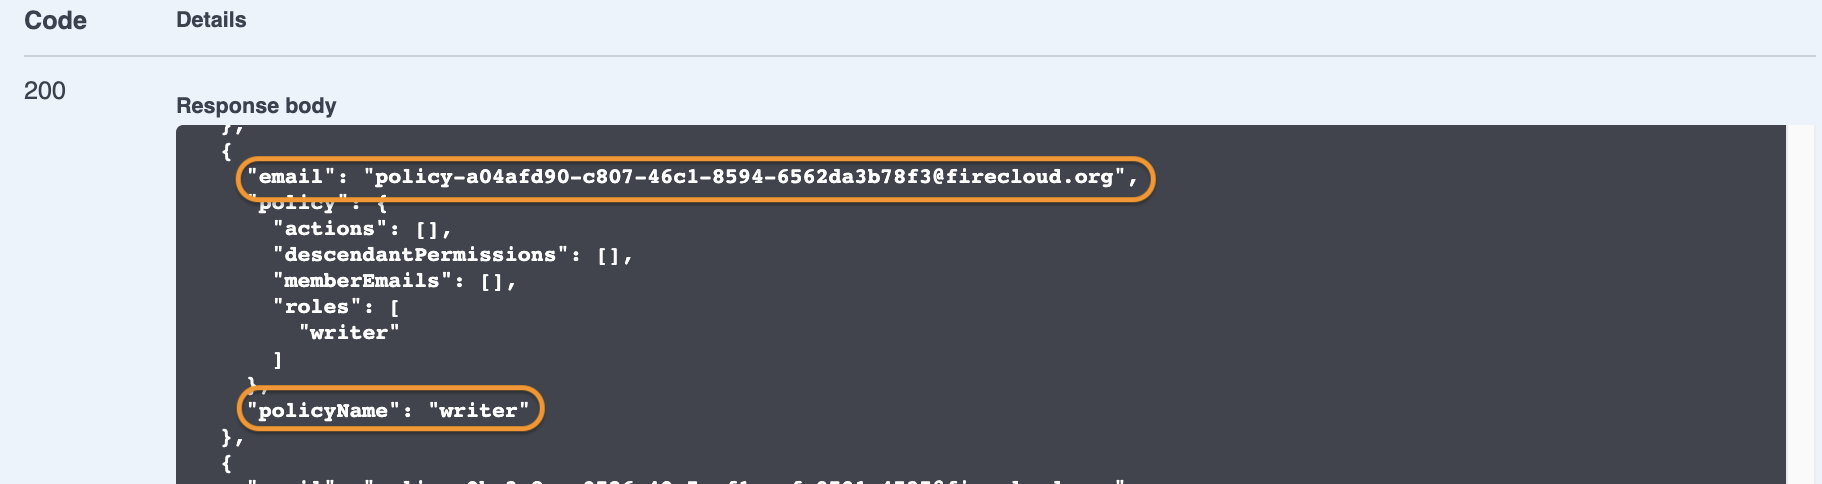 Screenshot of code 200 response body with email 'policy-a65f75a7-a65a-e6a6832a452@firecloud.org' and 'policyName writer' circled